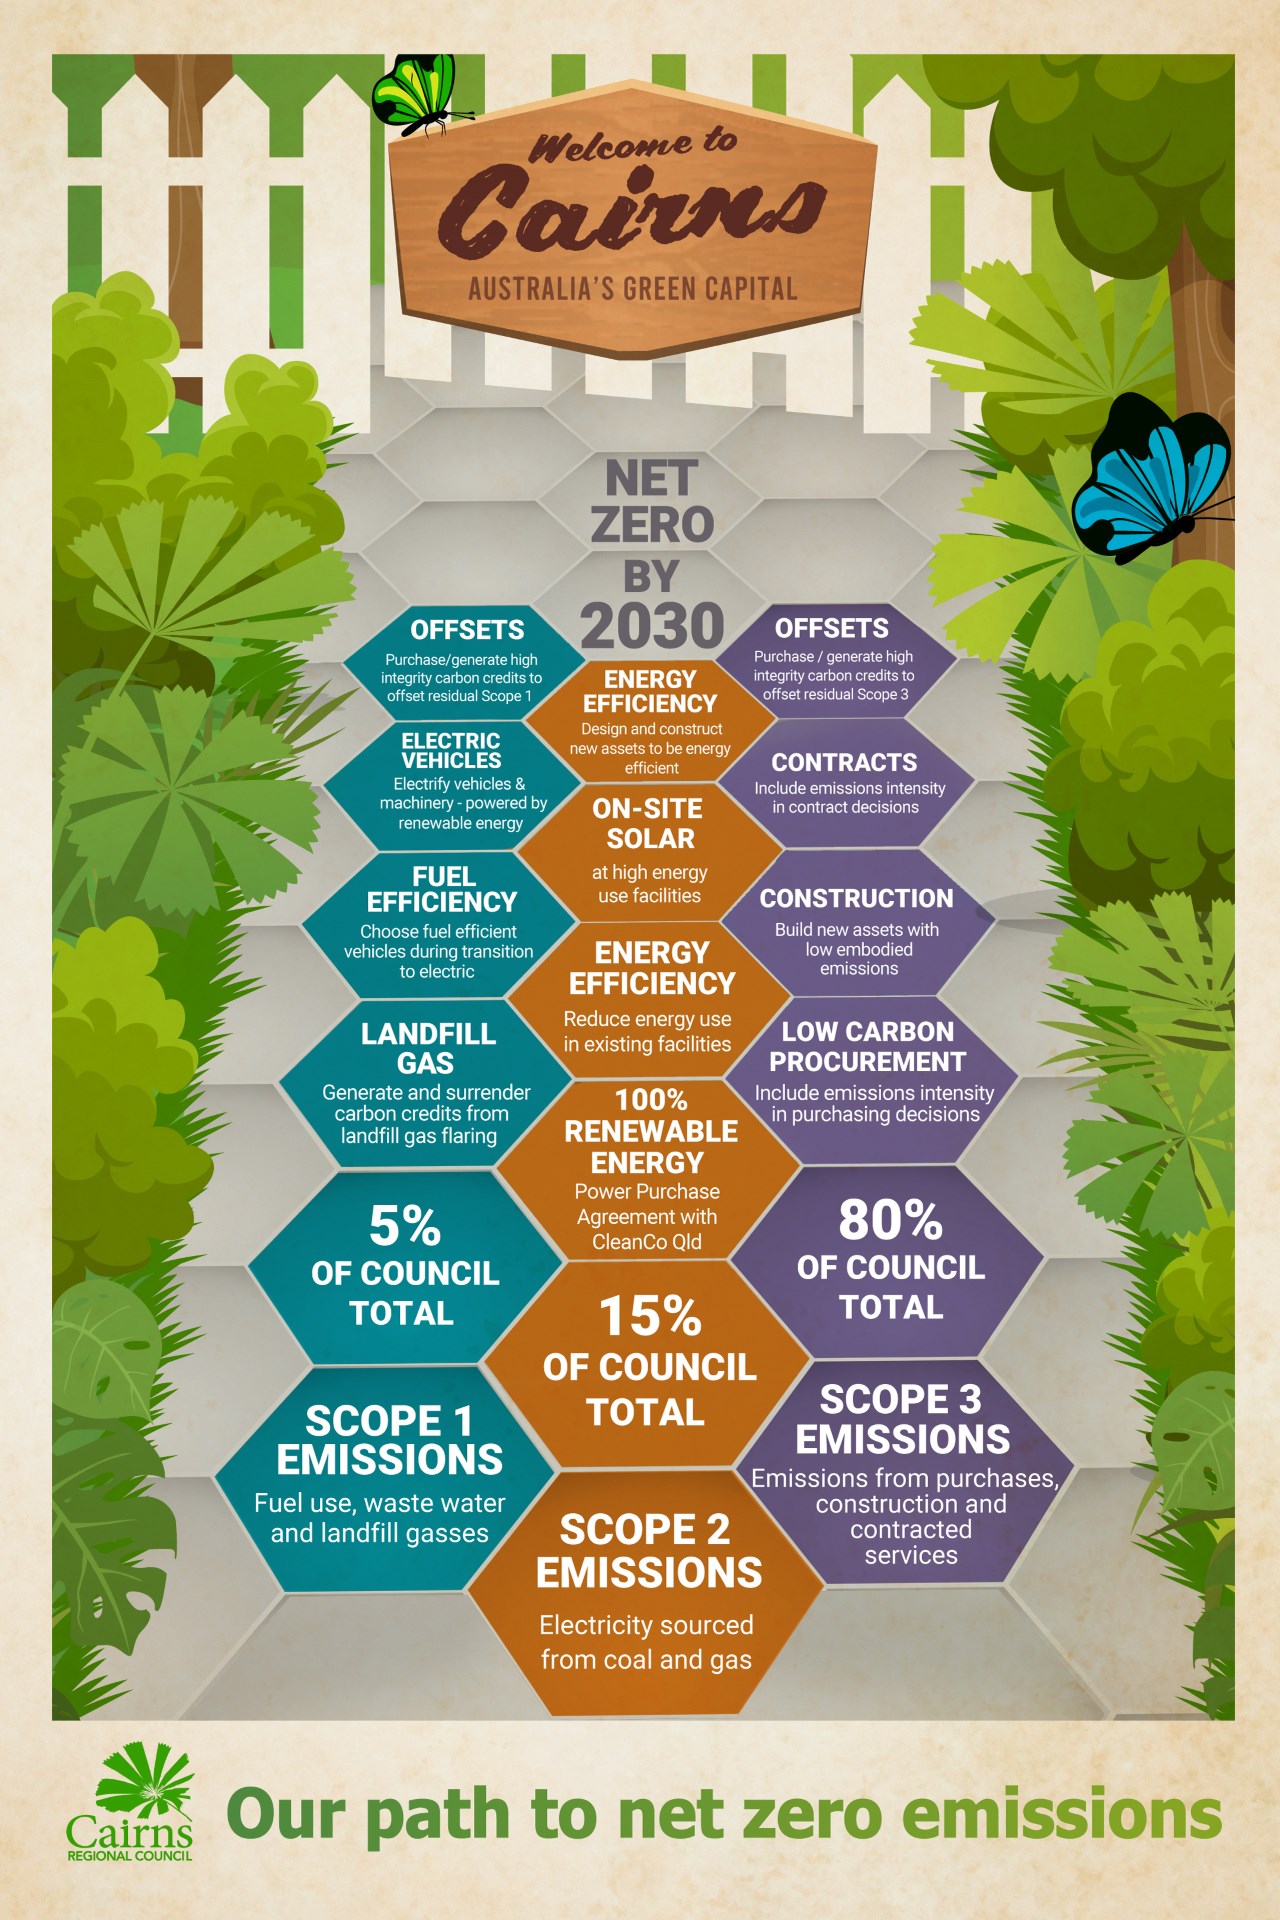 Image shows Cairns Regional Council's plan to achieve net zero emissions by 2030. Actions are categorised according to the scope of emissions which they address.